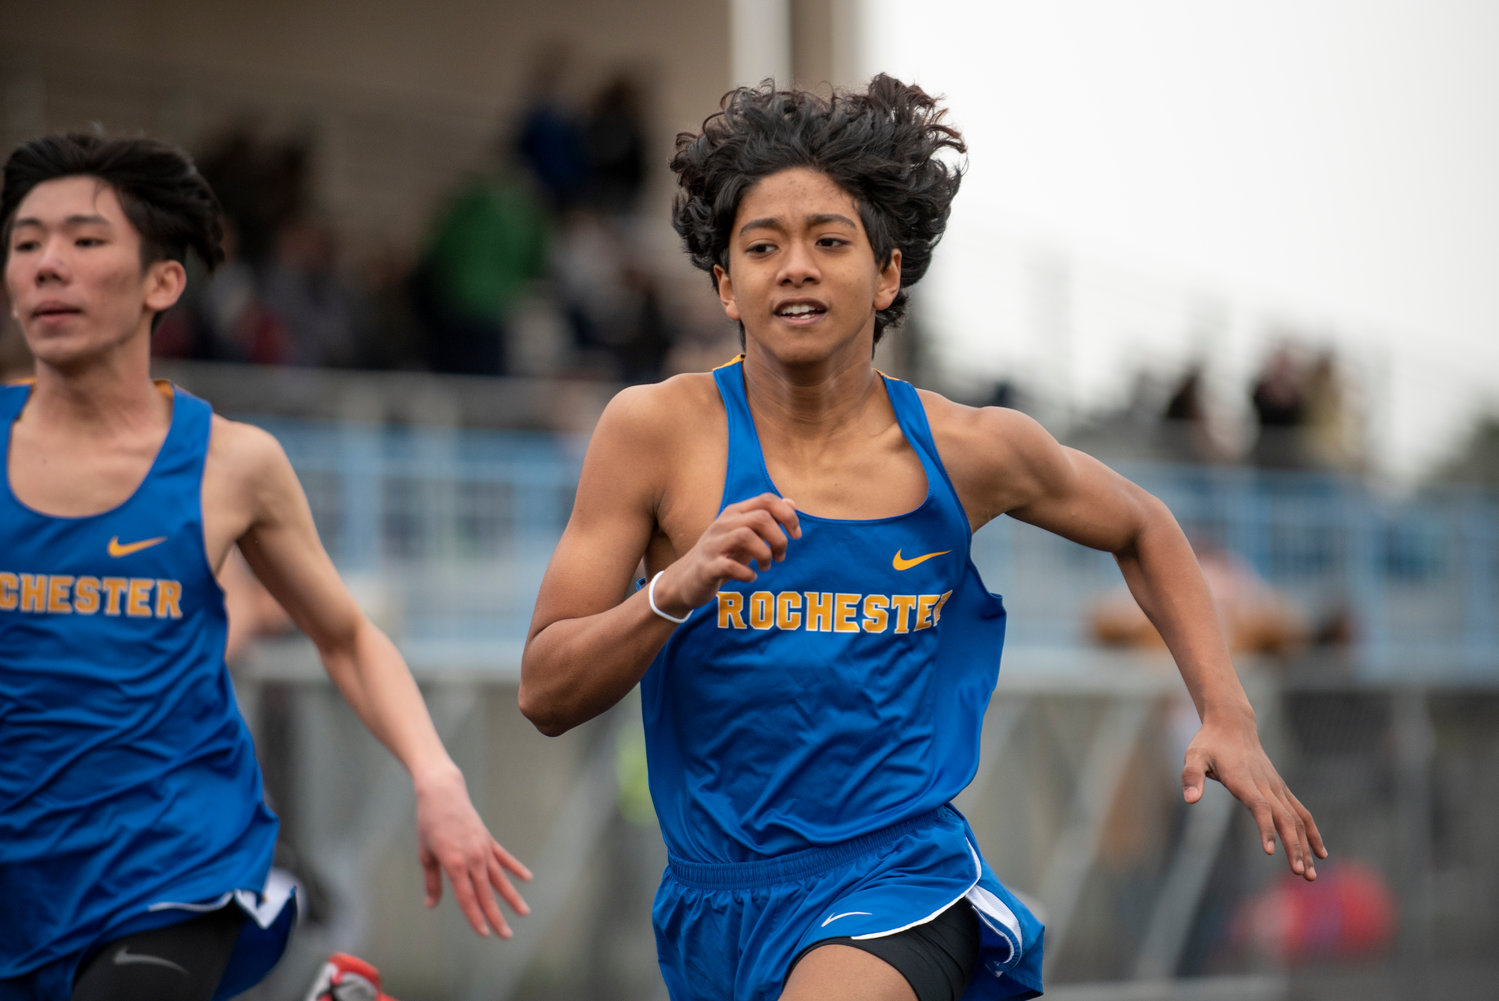 A Rochester runner sprints to the finish line in the boys 100-meter dash at a home meet on March 17.